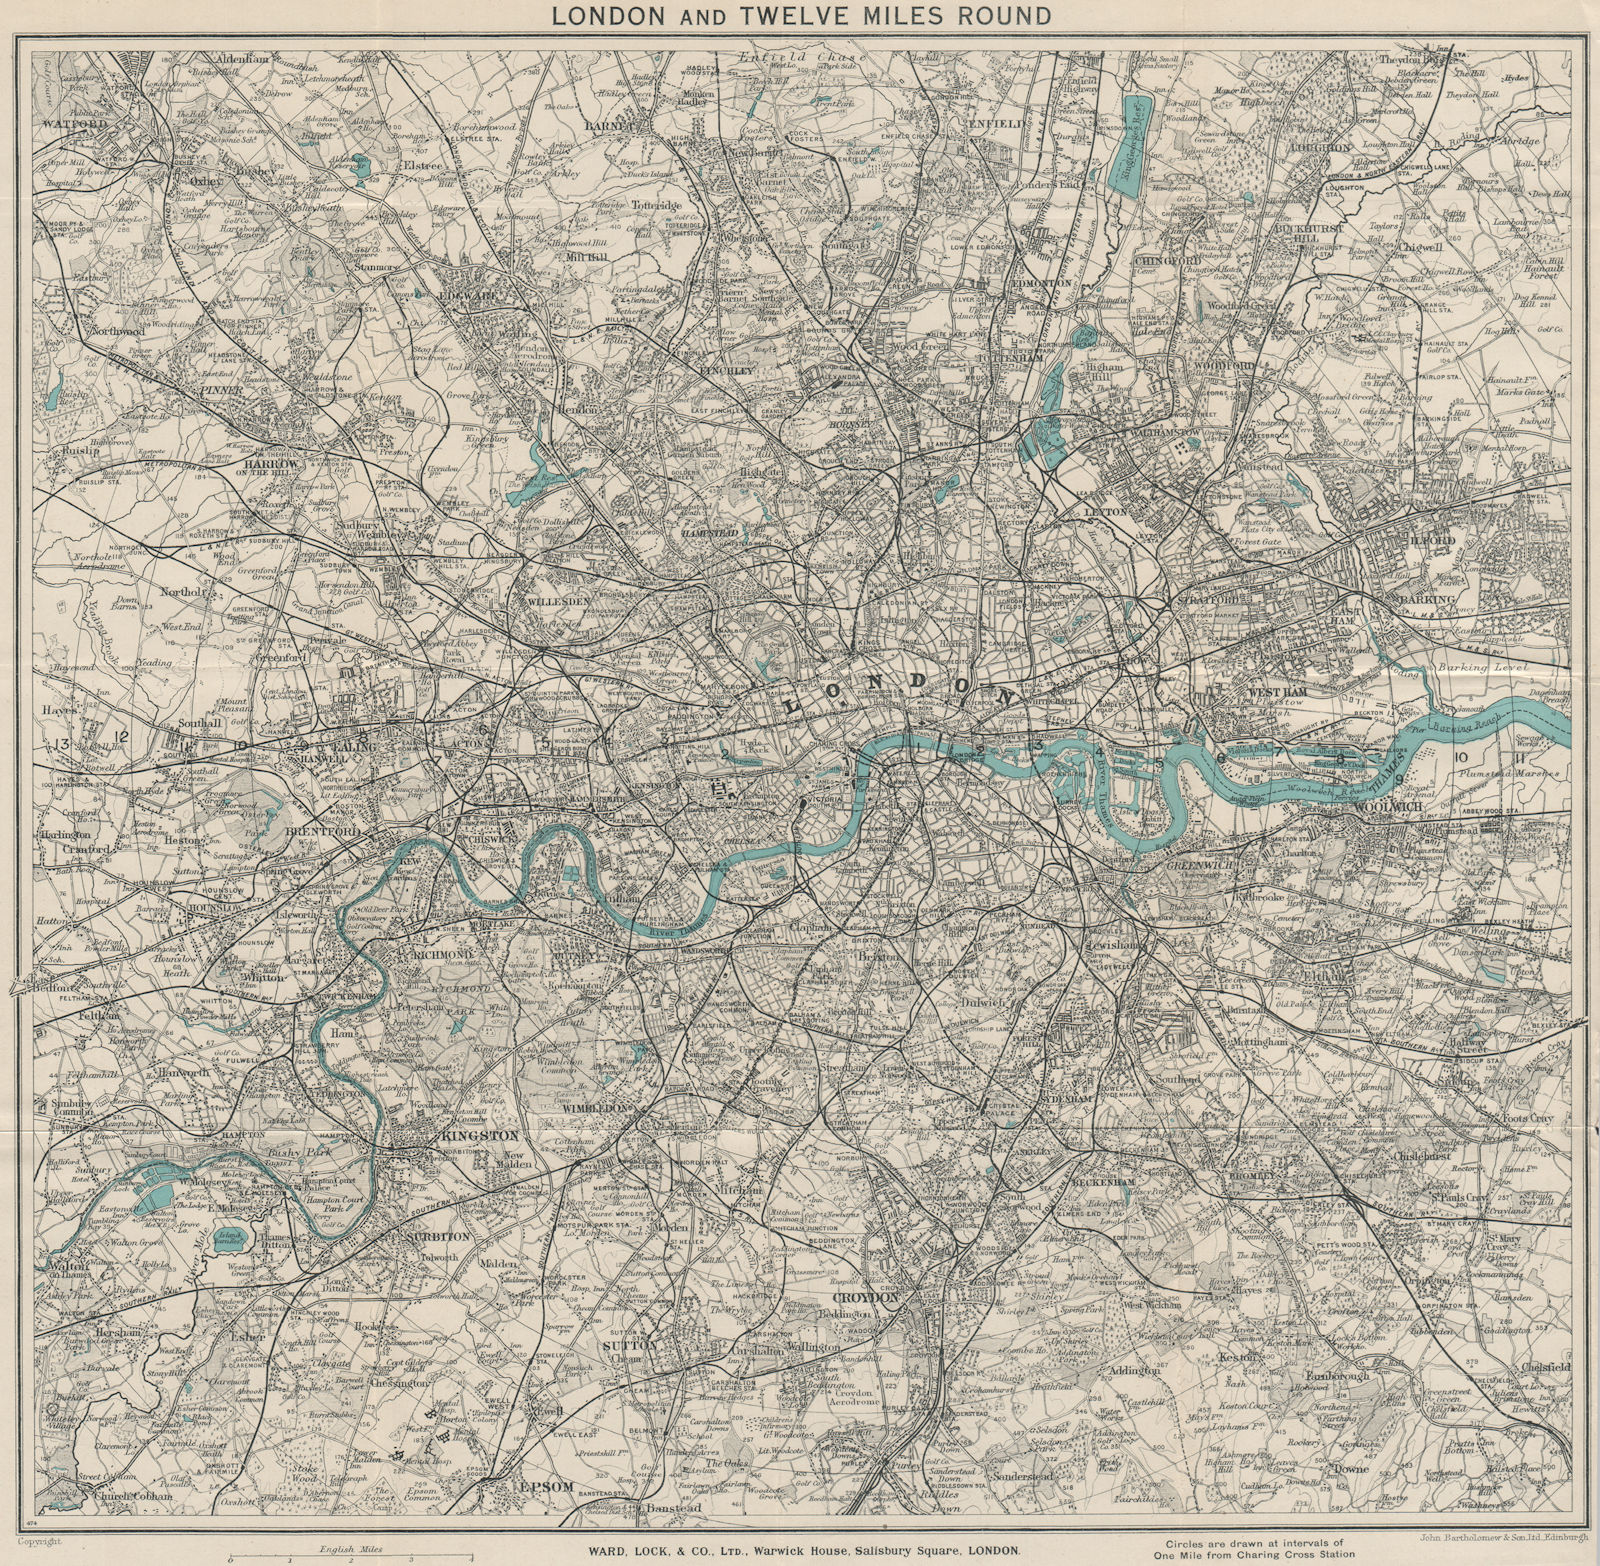 'LONDON AND TWELVE MILES ROUND'. Greater London. WARD LOCK 1933 old map